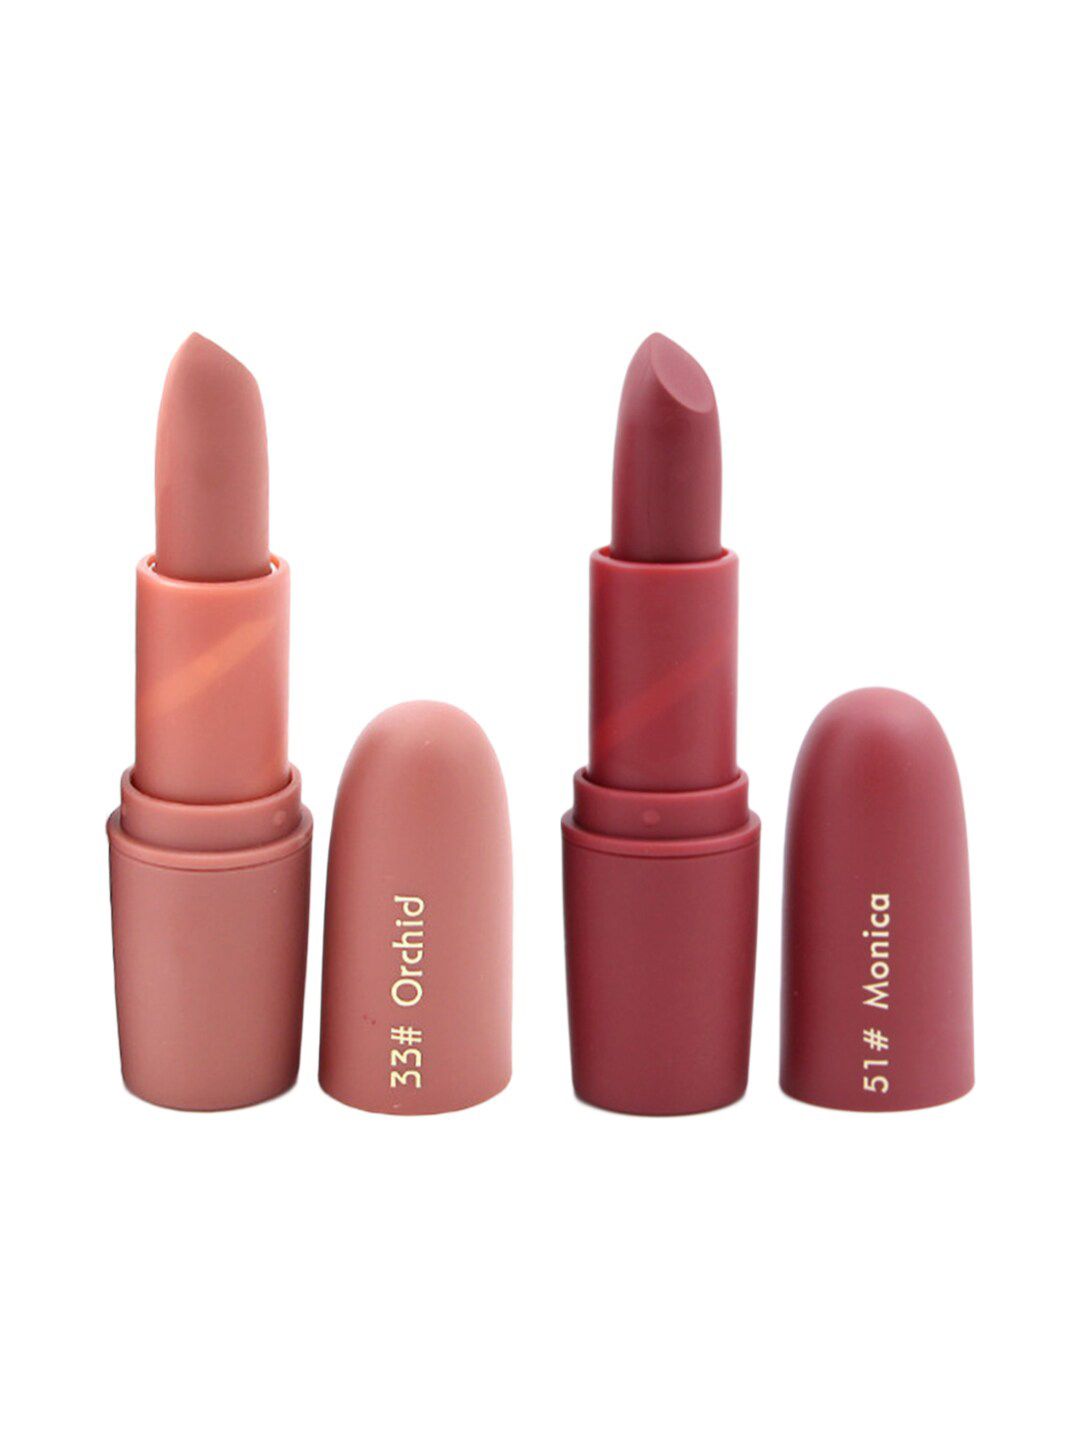 MISS ROSE Professional Make-Up Set of 2 Matte Creamy Lipsticks - Orchid 33 & Monica 51 Price in India